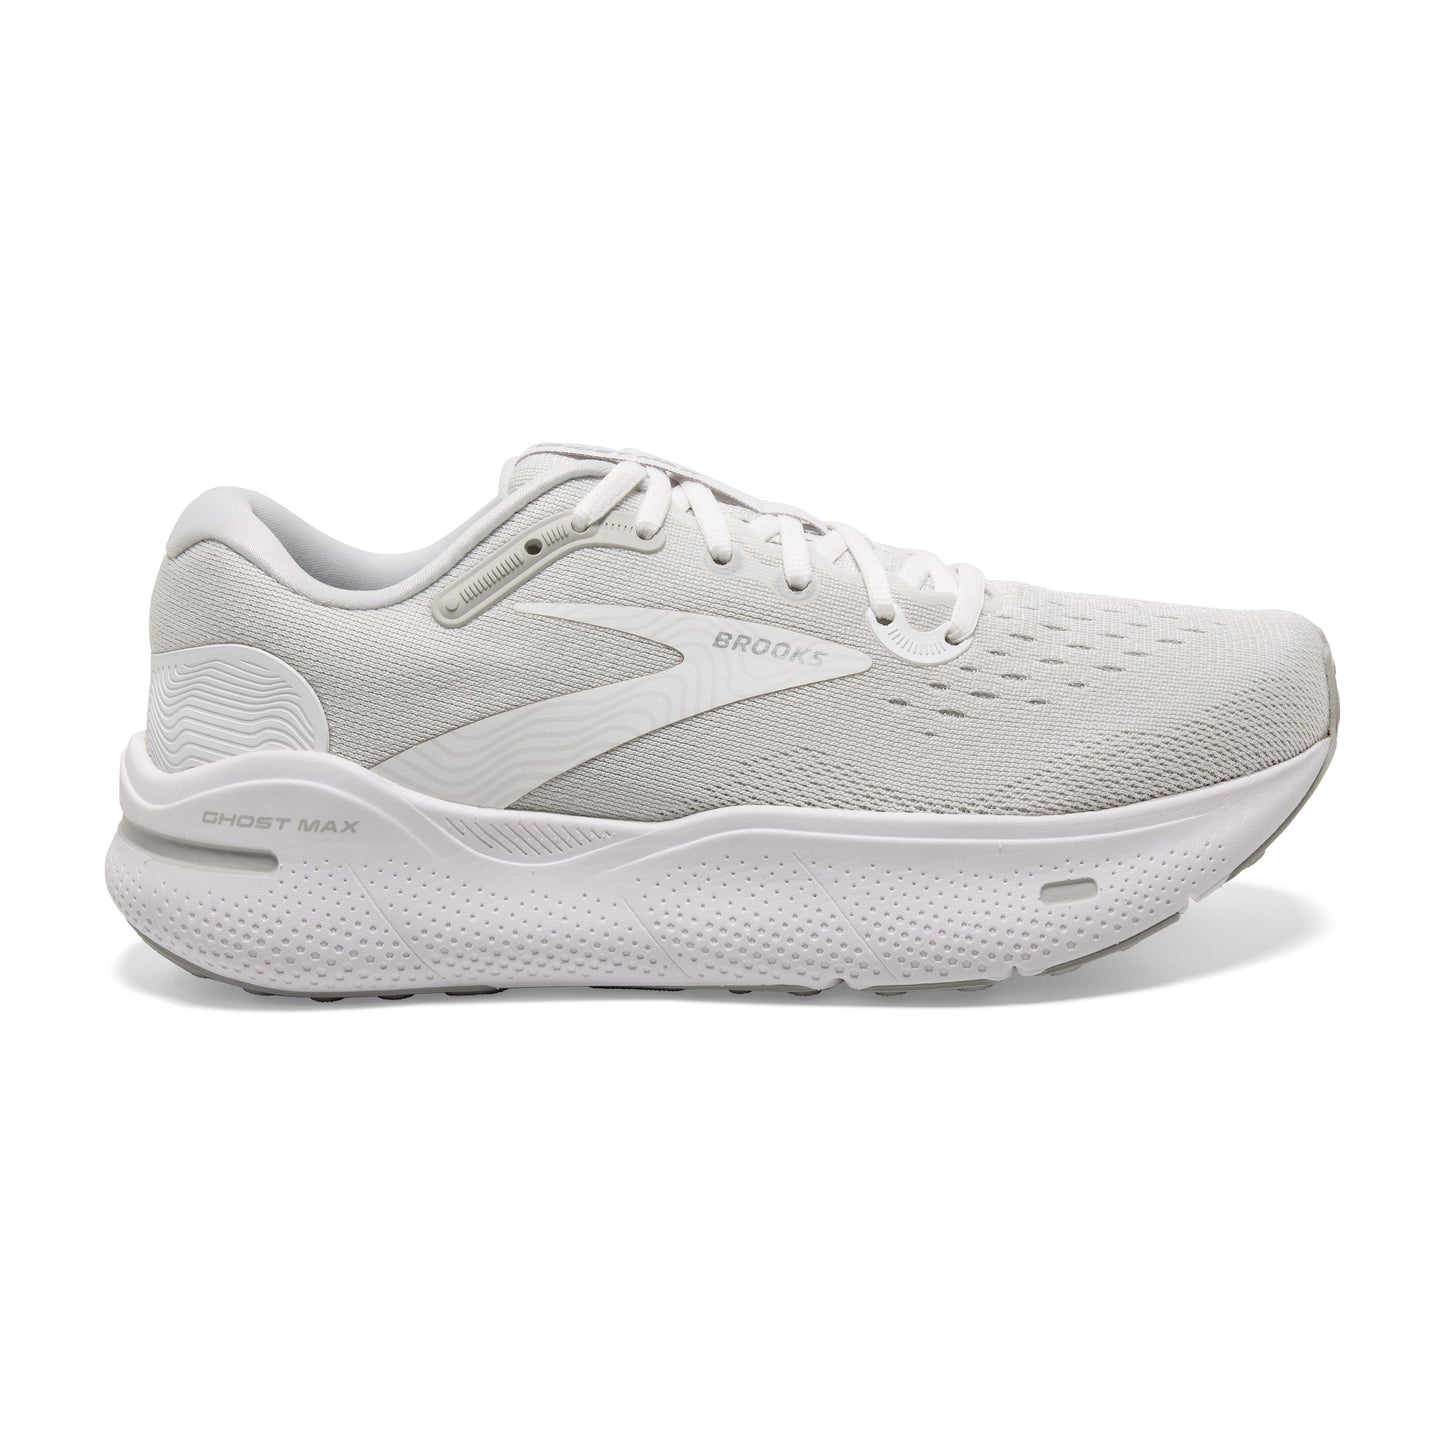 Women's Brooks Ghost Max White/Oyster/Metallic Silver